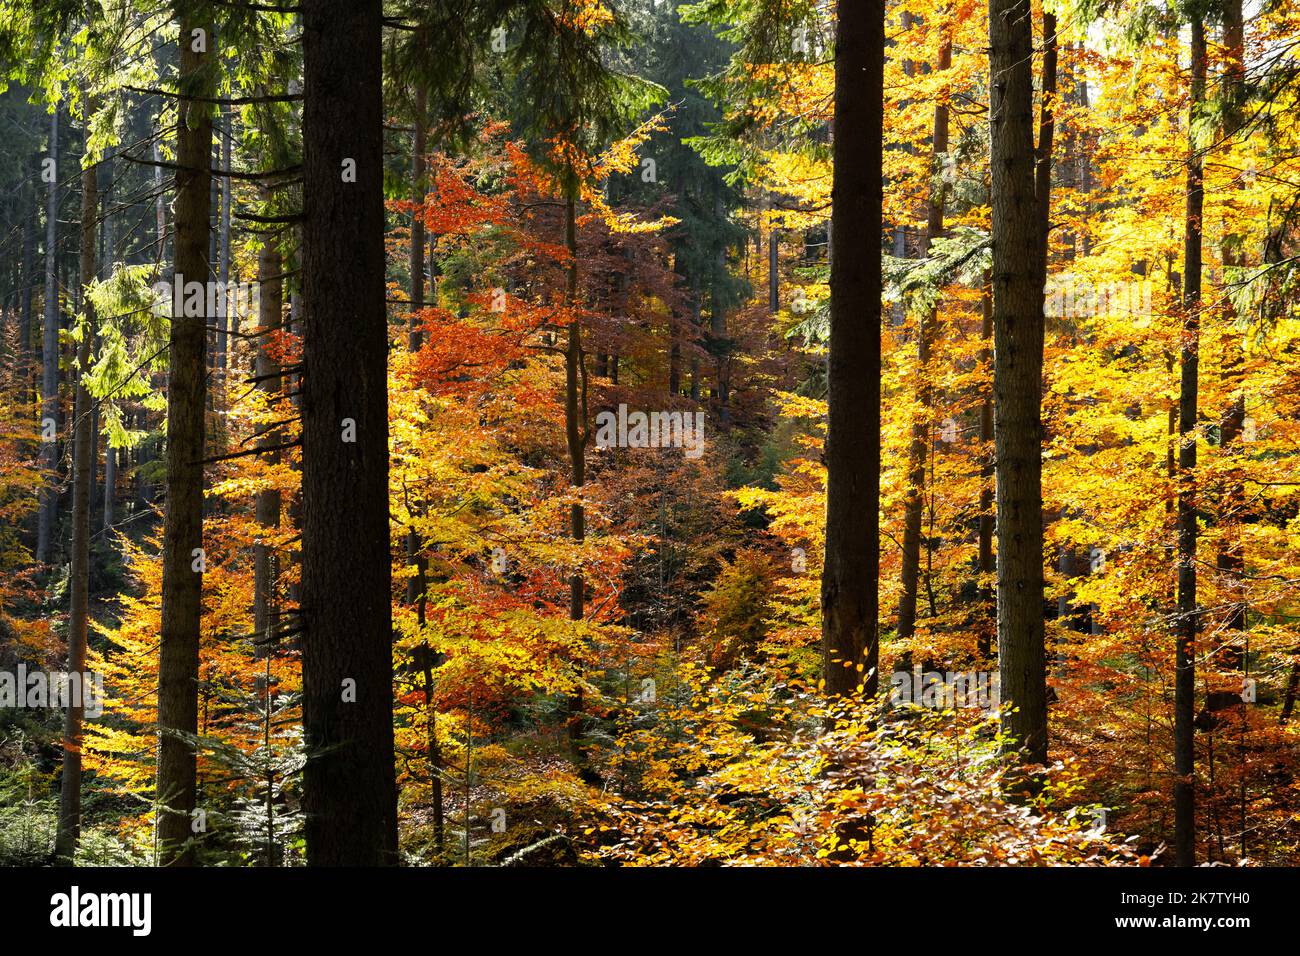 Majestic forest with yellow and orange folliage at autumn time. Picturesque fall scene in Carpathian mountains, Ukraine. Landscape photography Stock Photo